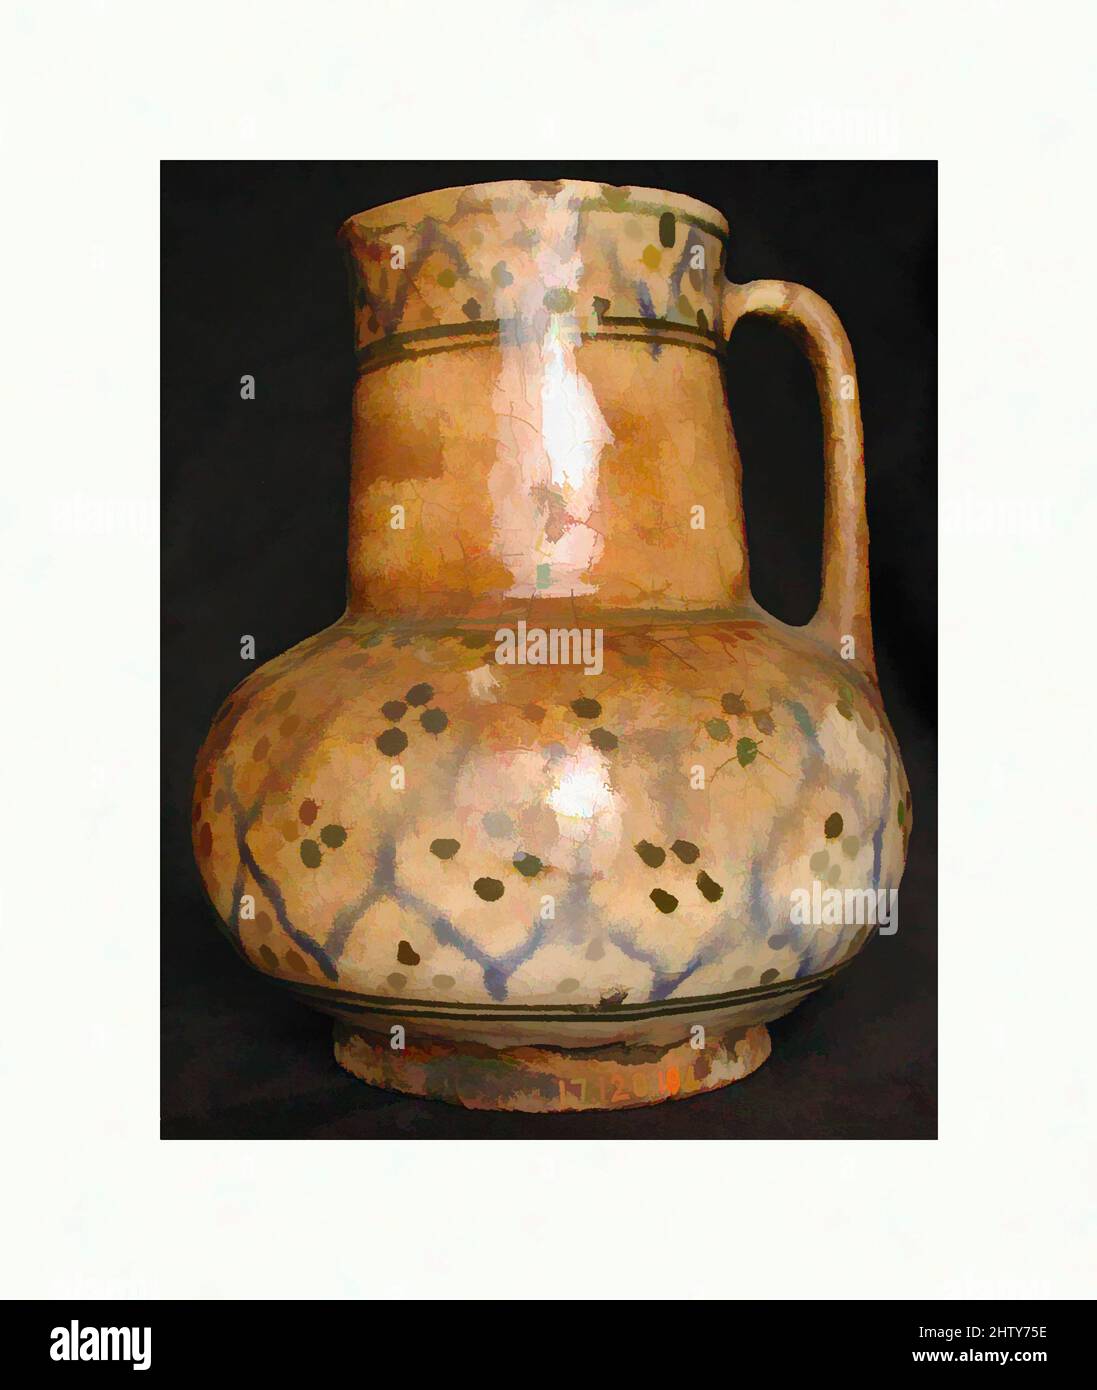 Art inspired by Ewer, 18th century, Attributed to Iran, Stonepaste; underglaze painted, H. 5 7/8 in. (14.9 cm), Ceramics, Classic works modernized by Artotop with a splash of modernity. Shapes, color and value, eye-catching visual impact on art. Emotions through freedom of artworks in a contemporary way. A timeless message pursuing a wildly creative new direction. Artists turning to the digital medium and creating the Artotop NFT Stock Photo